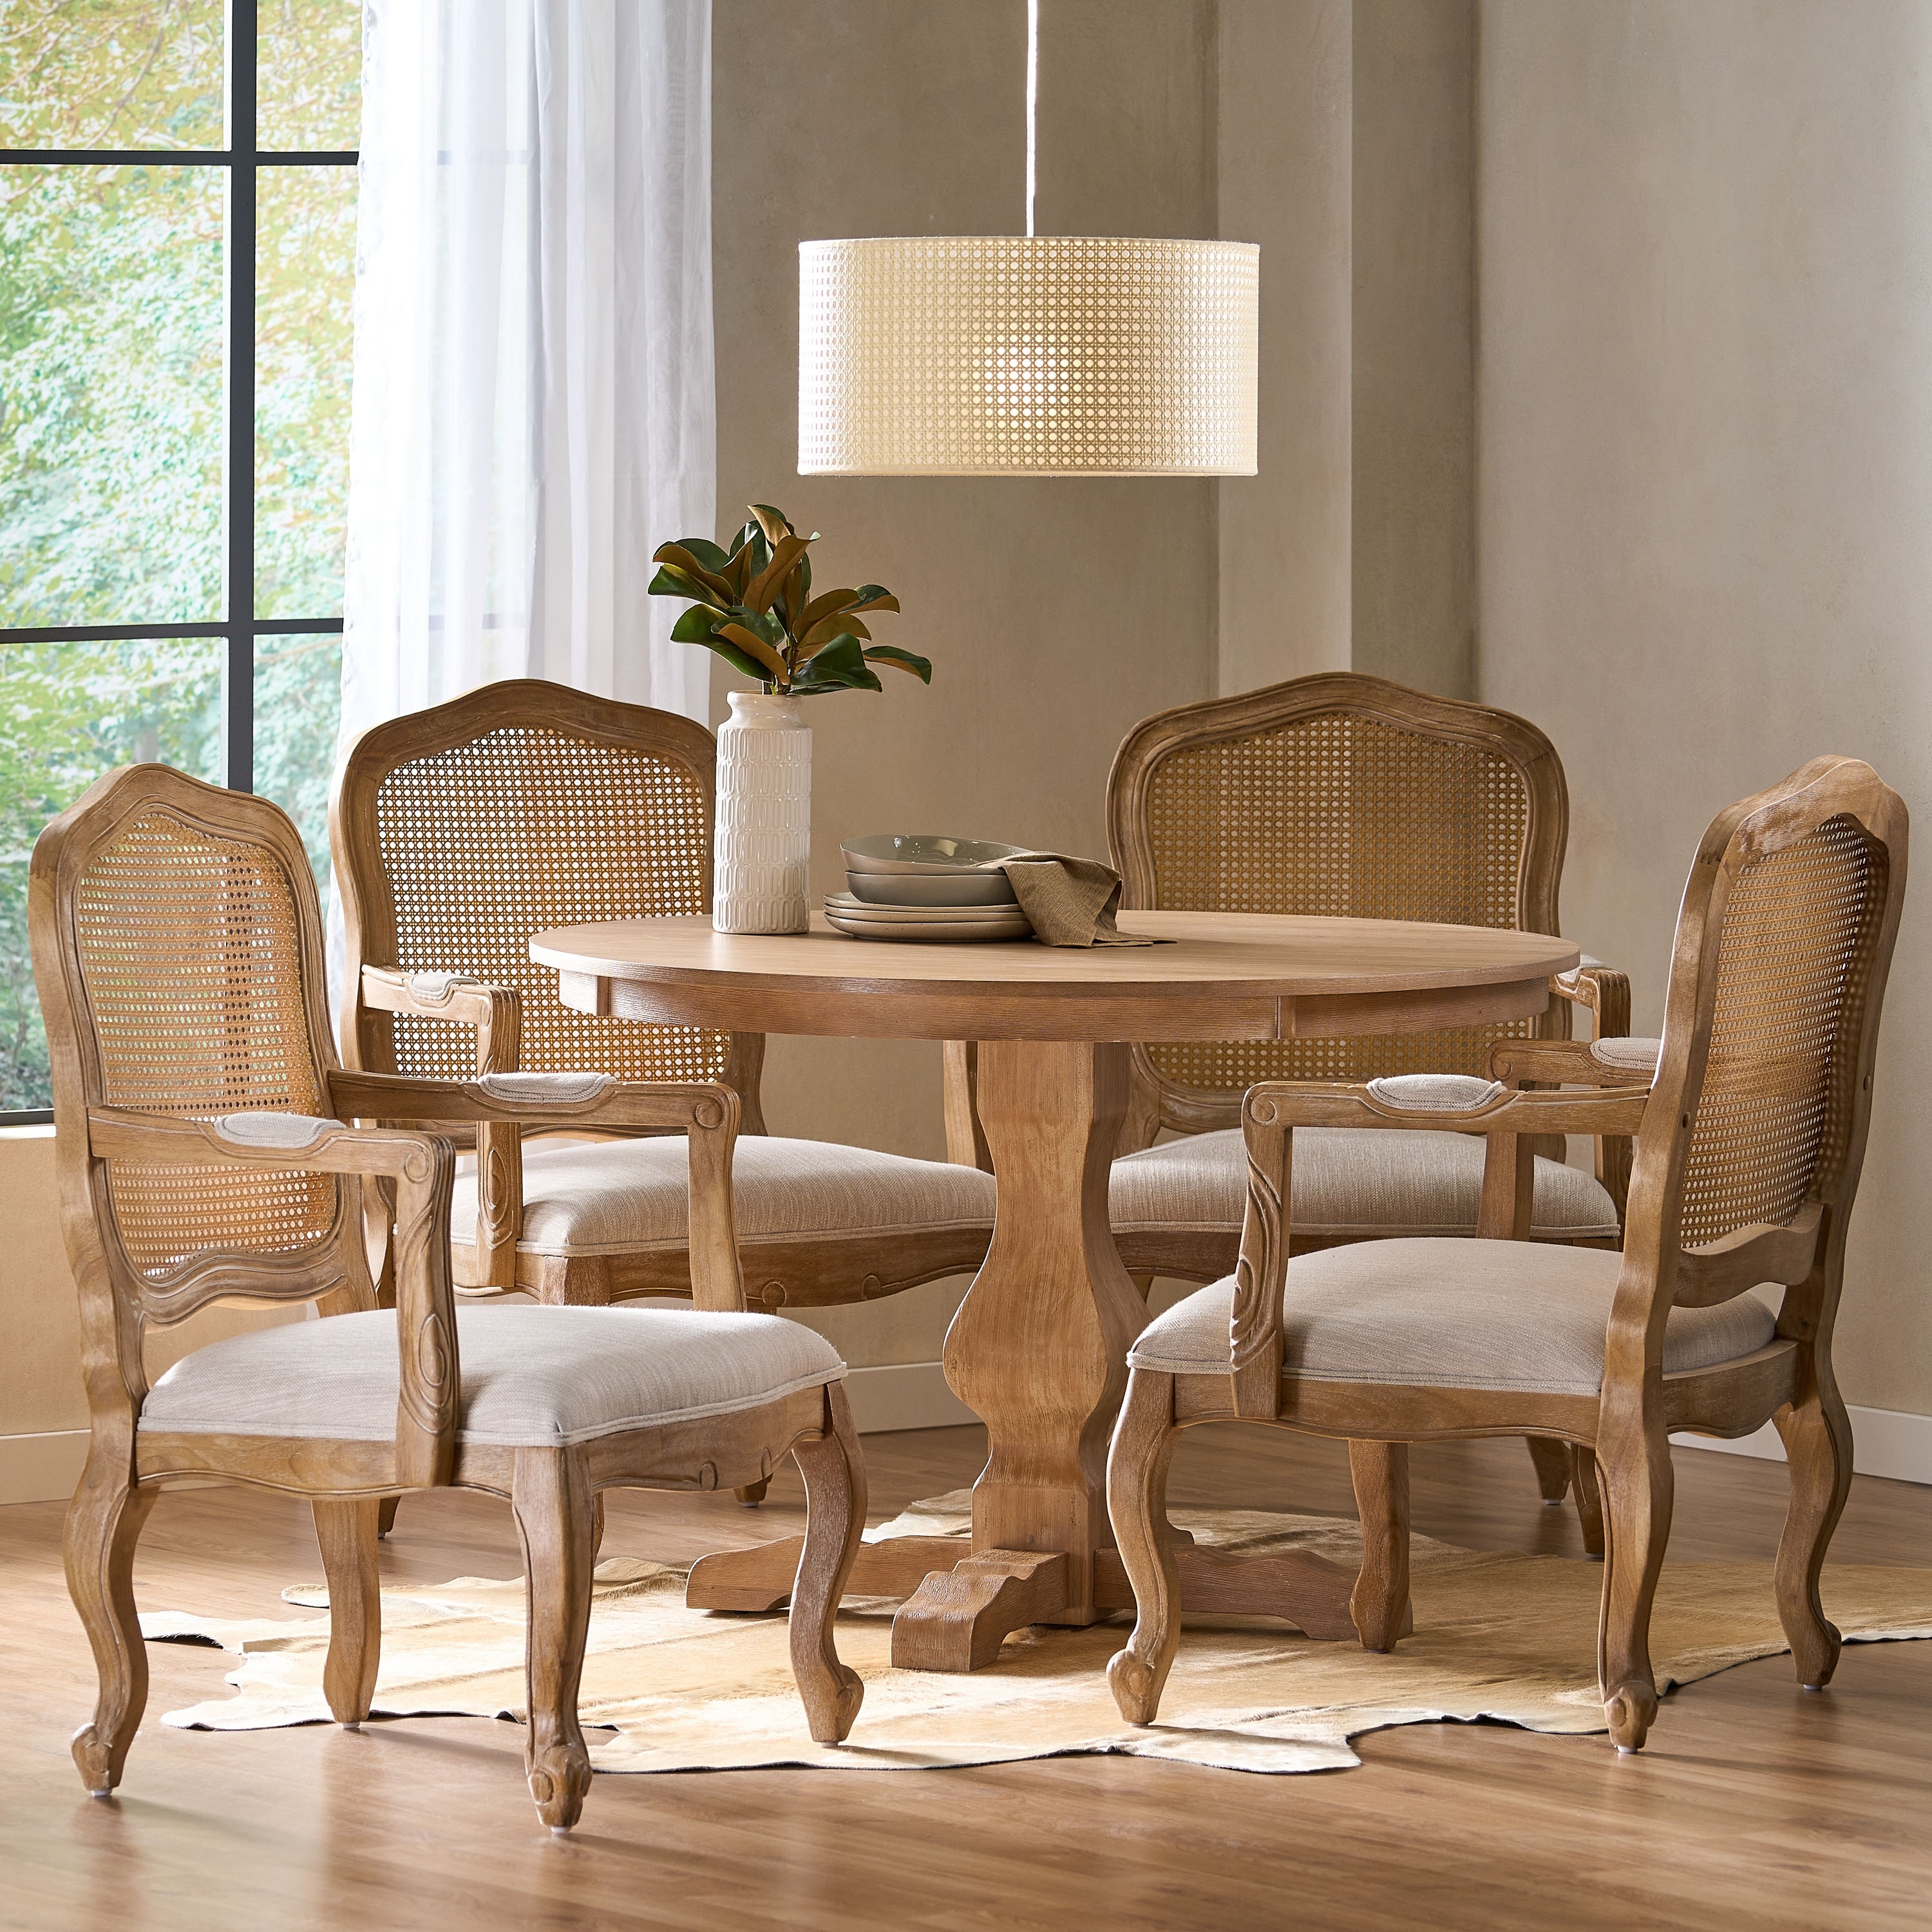 Christopher Knight Home Ardyce Wood and Cane Upholstered 5 Piece Circular Dining Set